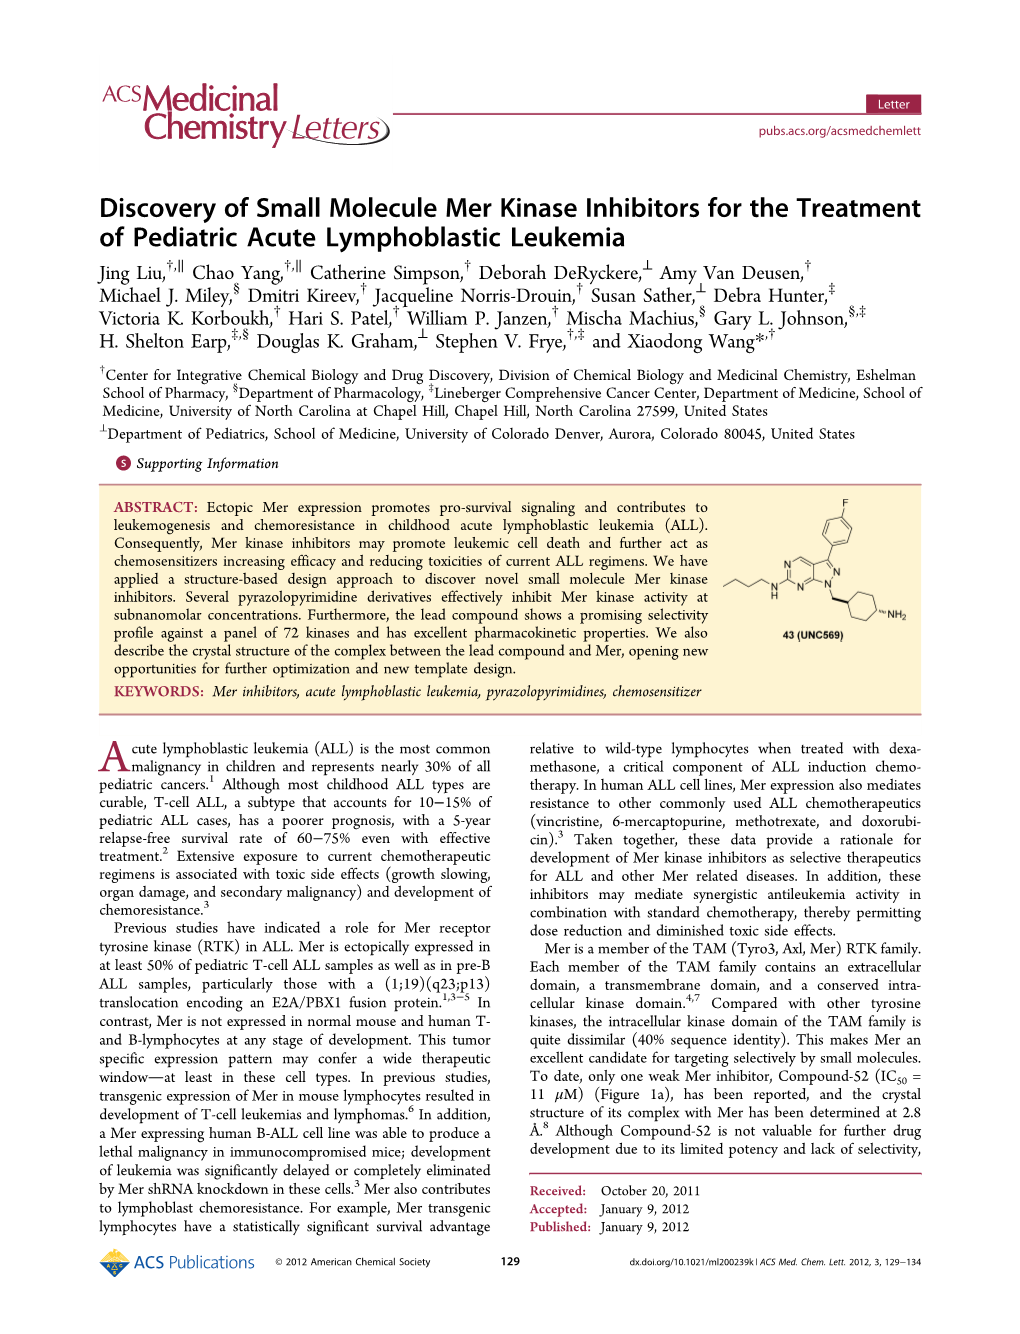 Discovery of Small Molecule Mer Kinase Inhibitors for the Treatment